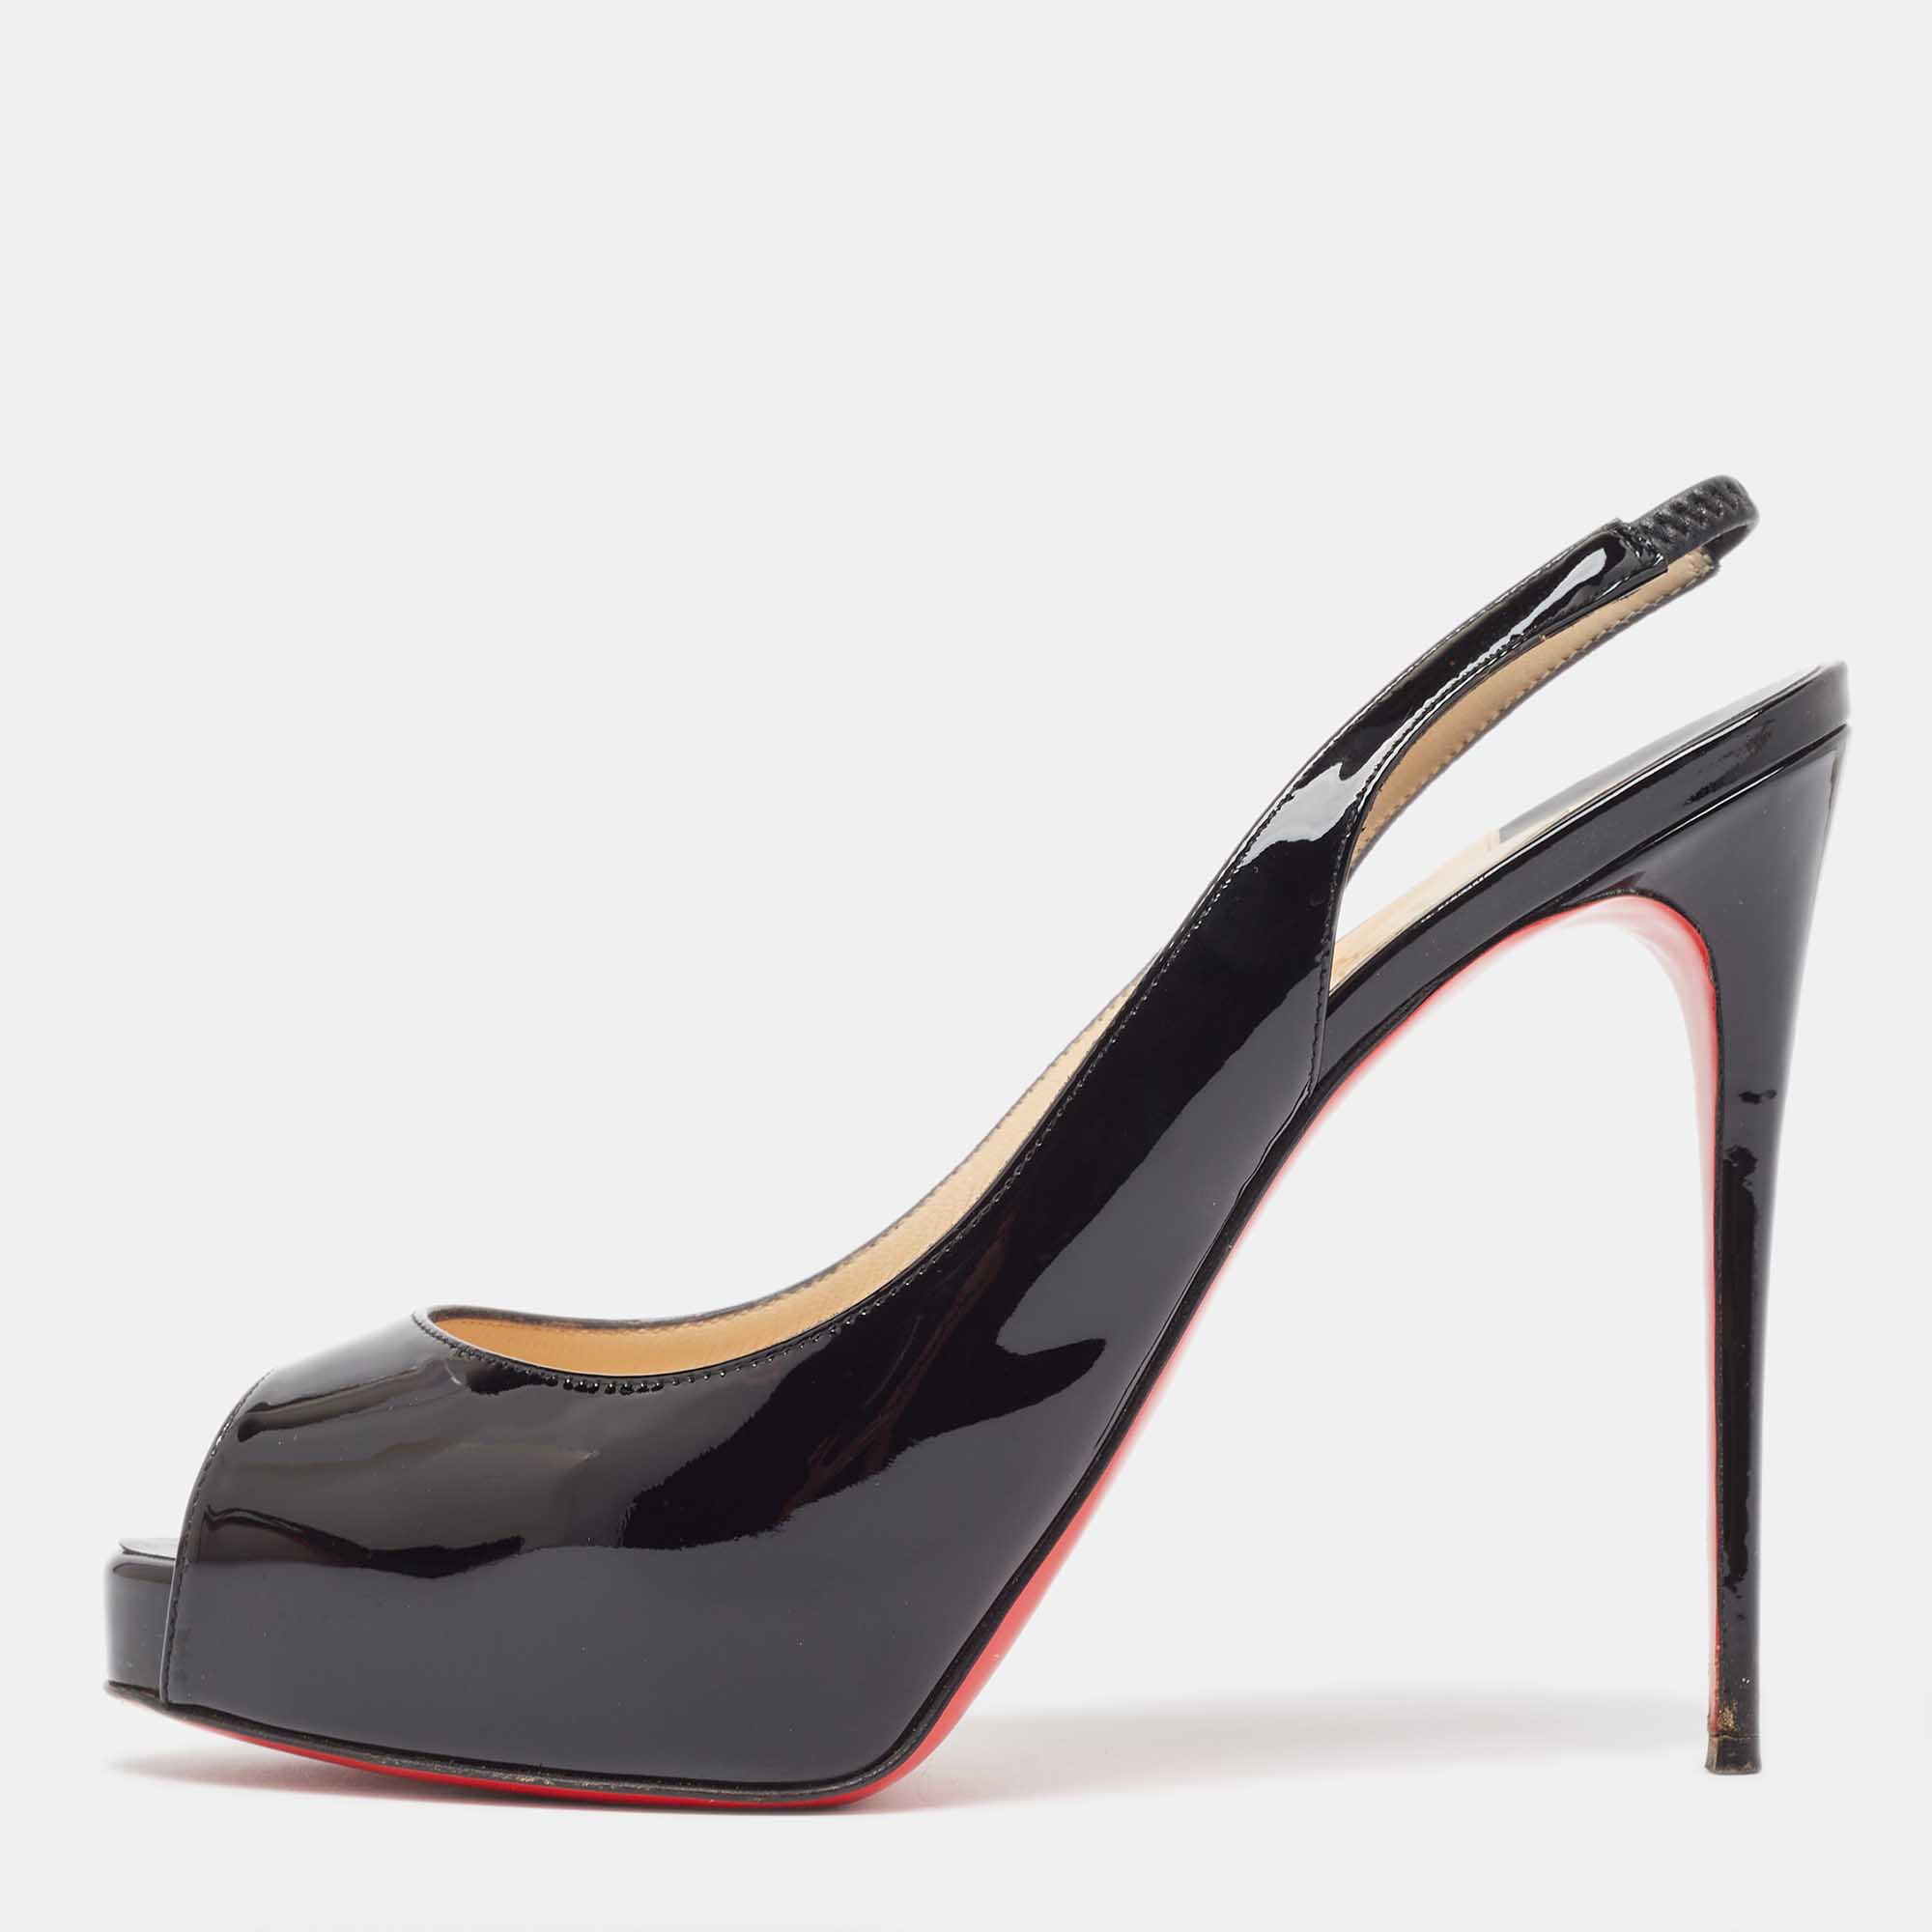 Christian louboutin black patent leather private number sandals size 40